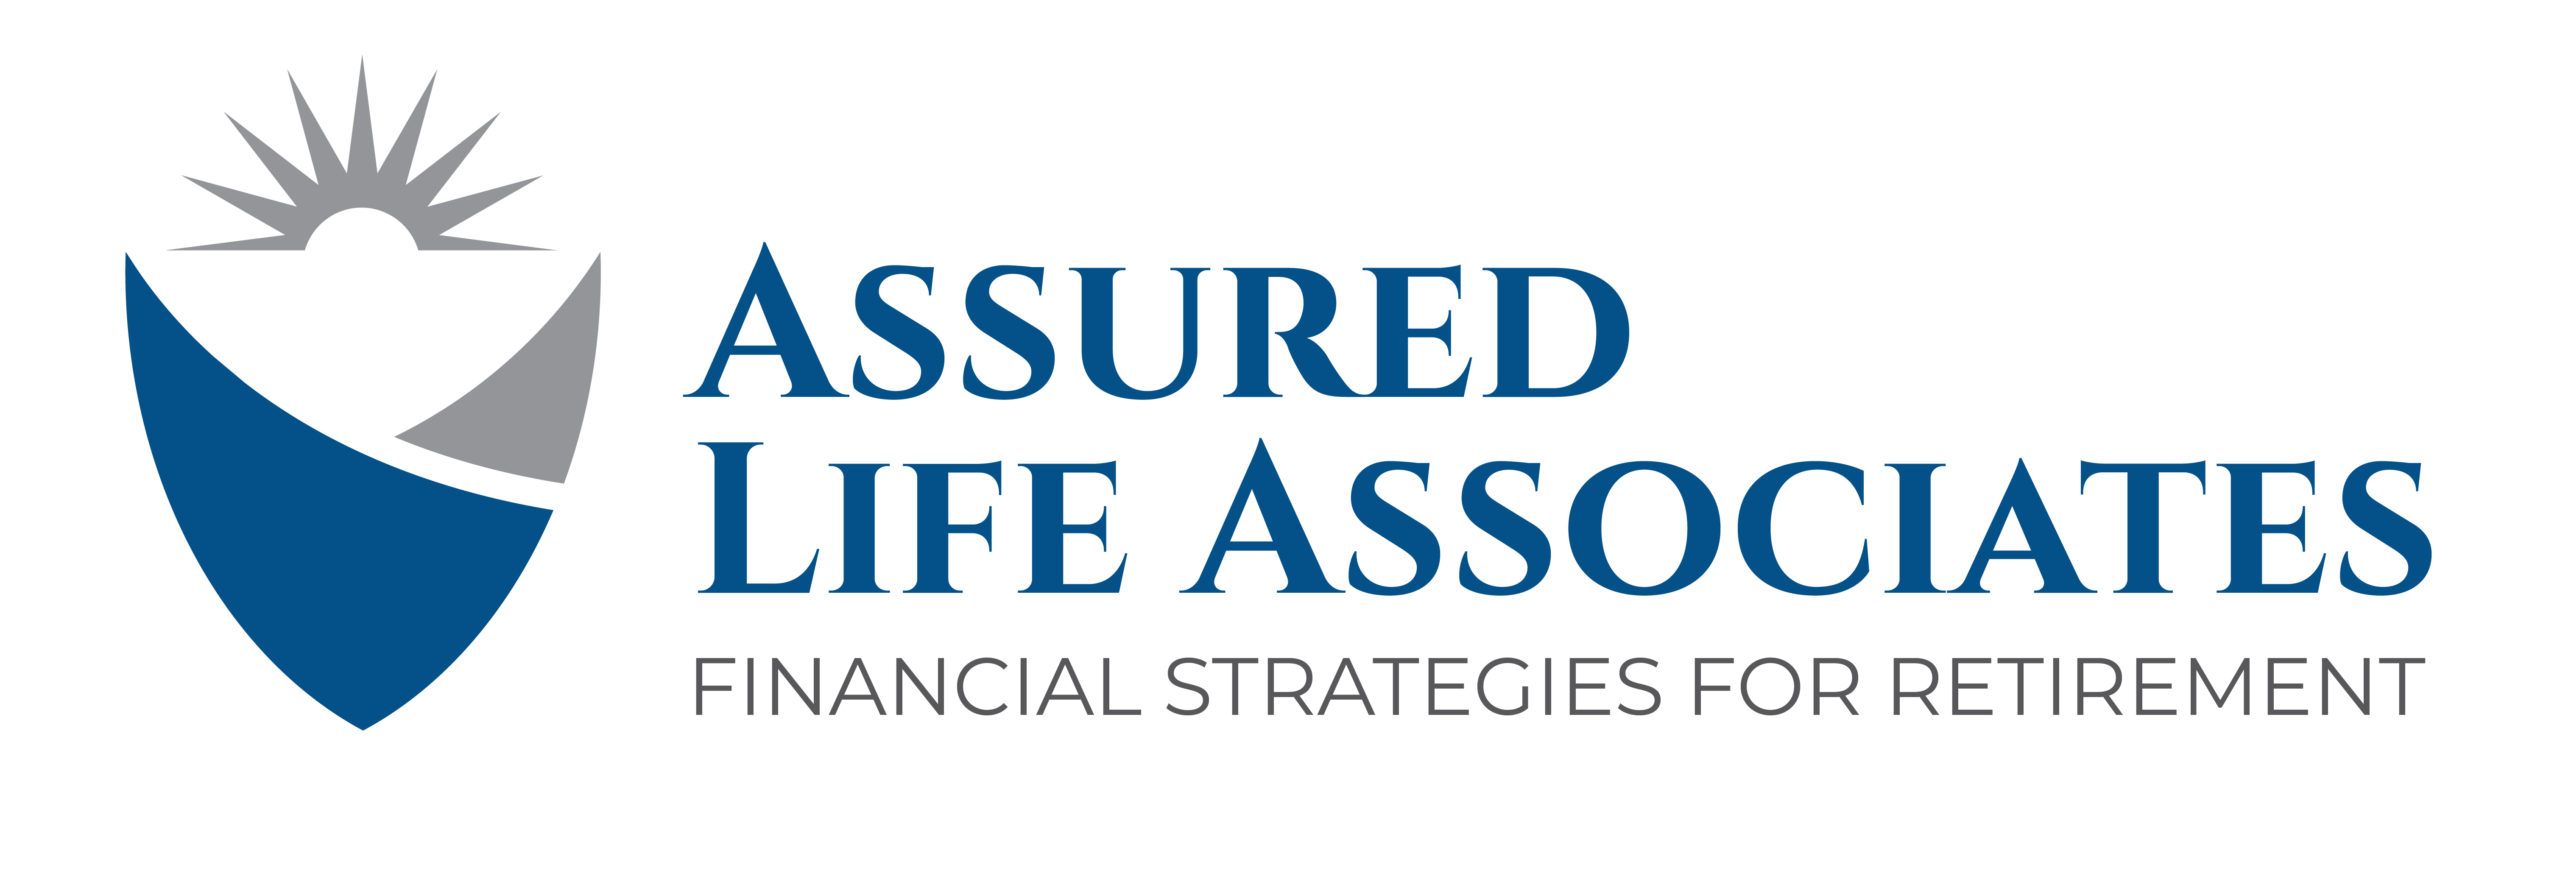 IFW Financial Professional Philip Meese